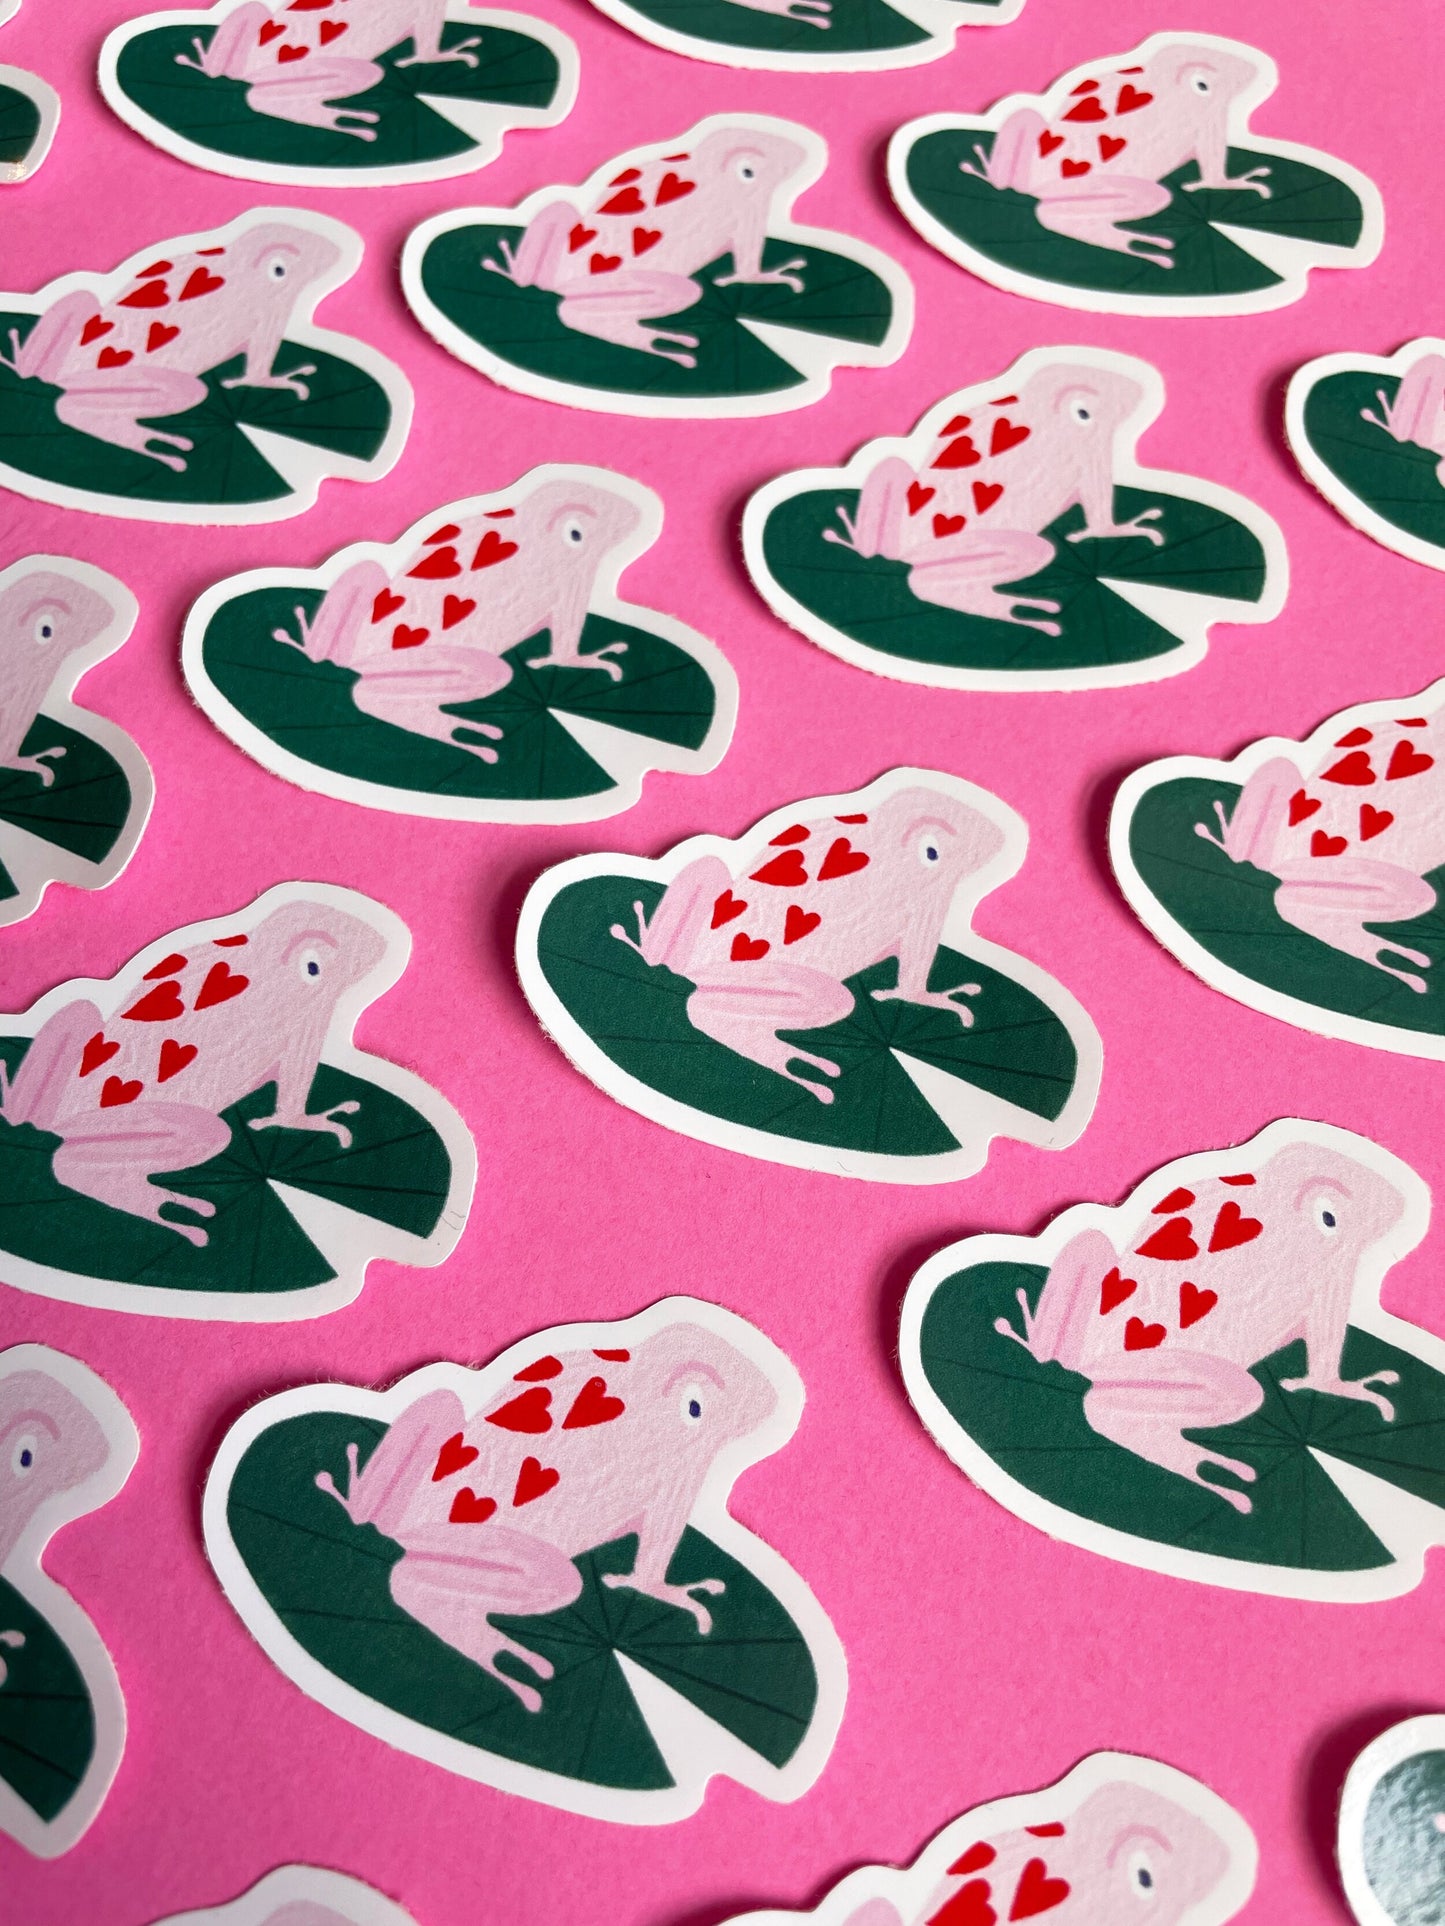 small vinyl sticker with a pink frog with hearts on it sitting on a dark green lily pad